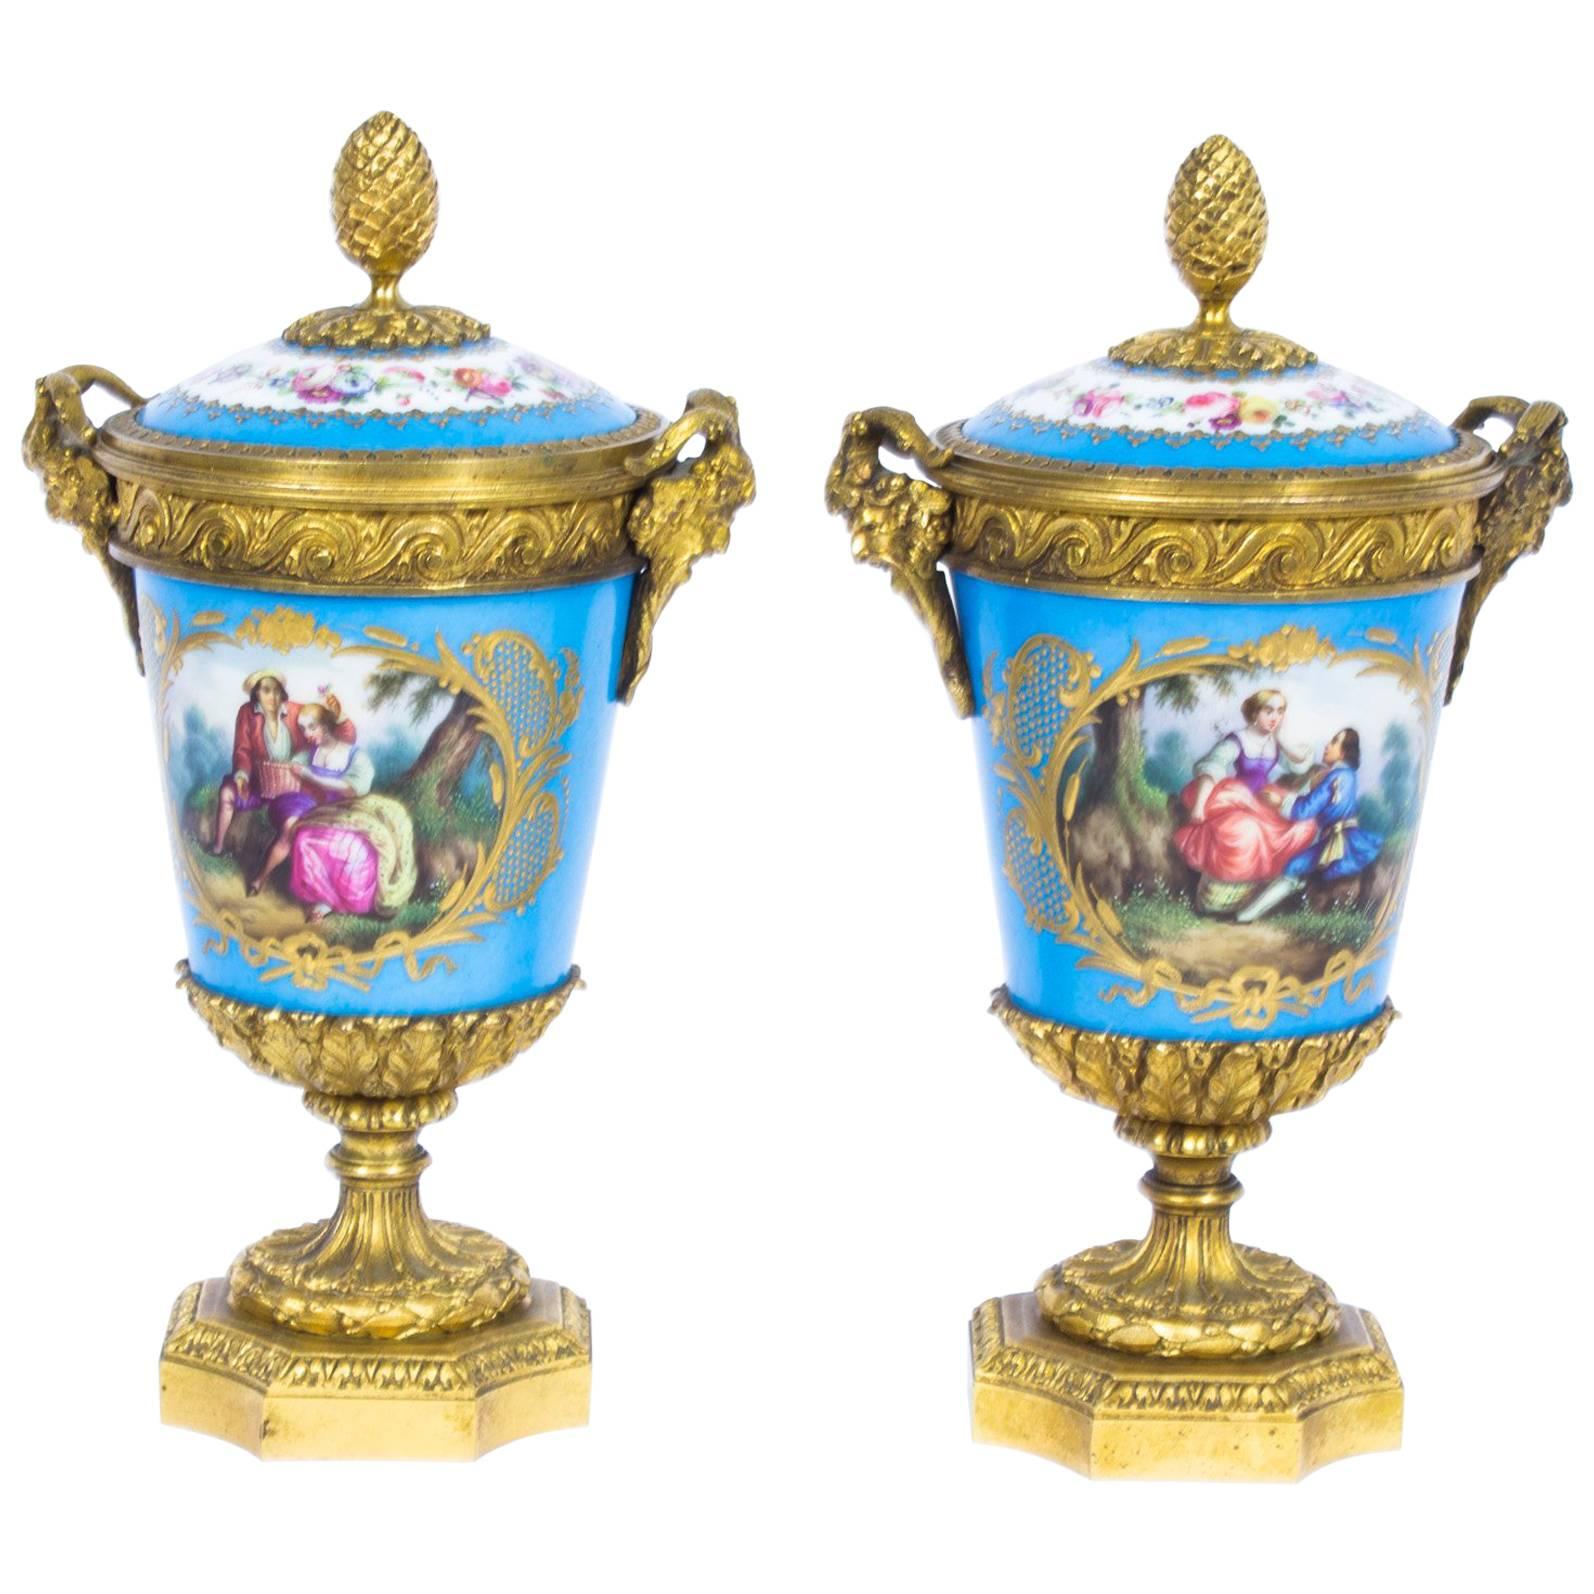 19th Century Pair of French Ormolu-Mounted Sèvres Lidded Urns Vases